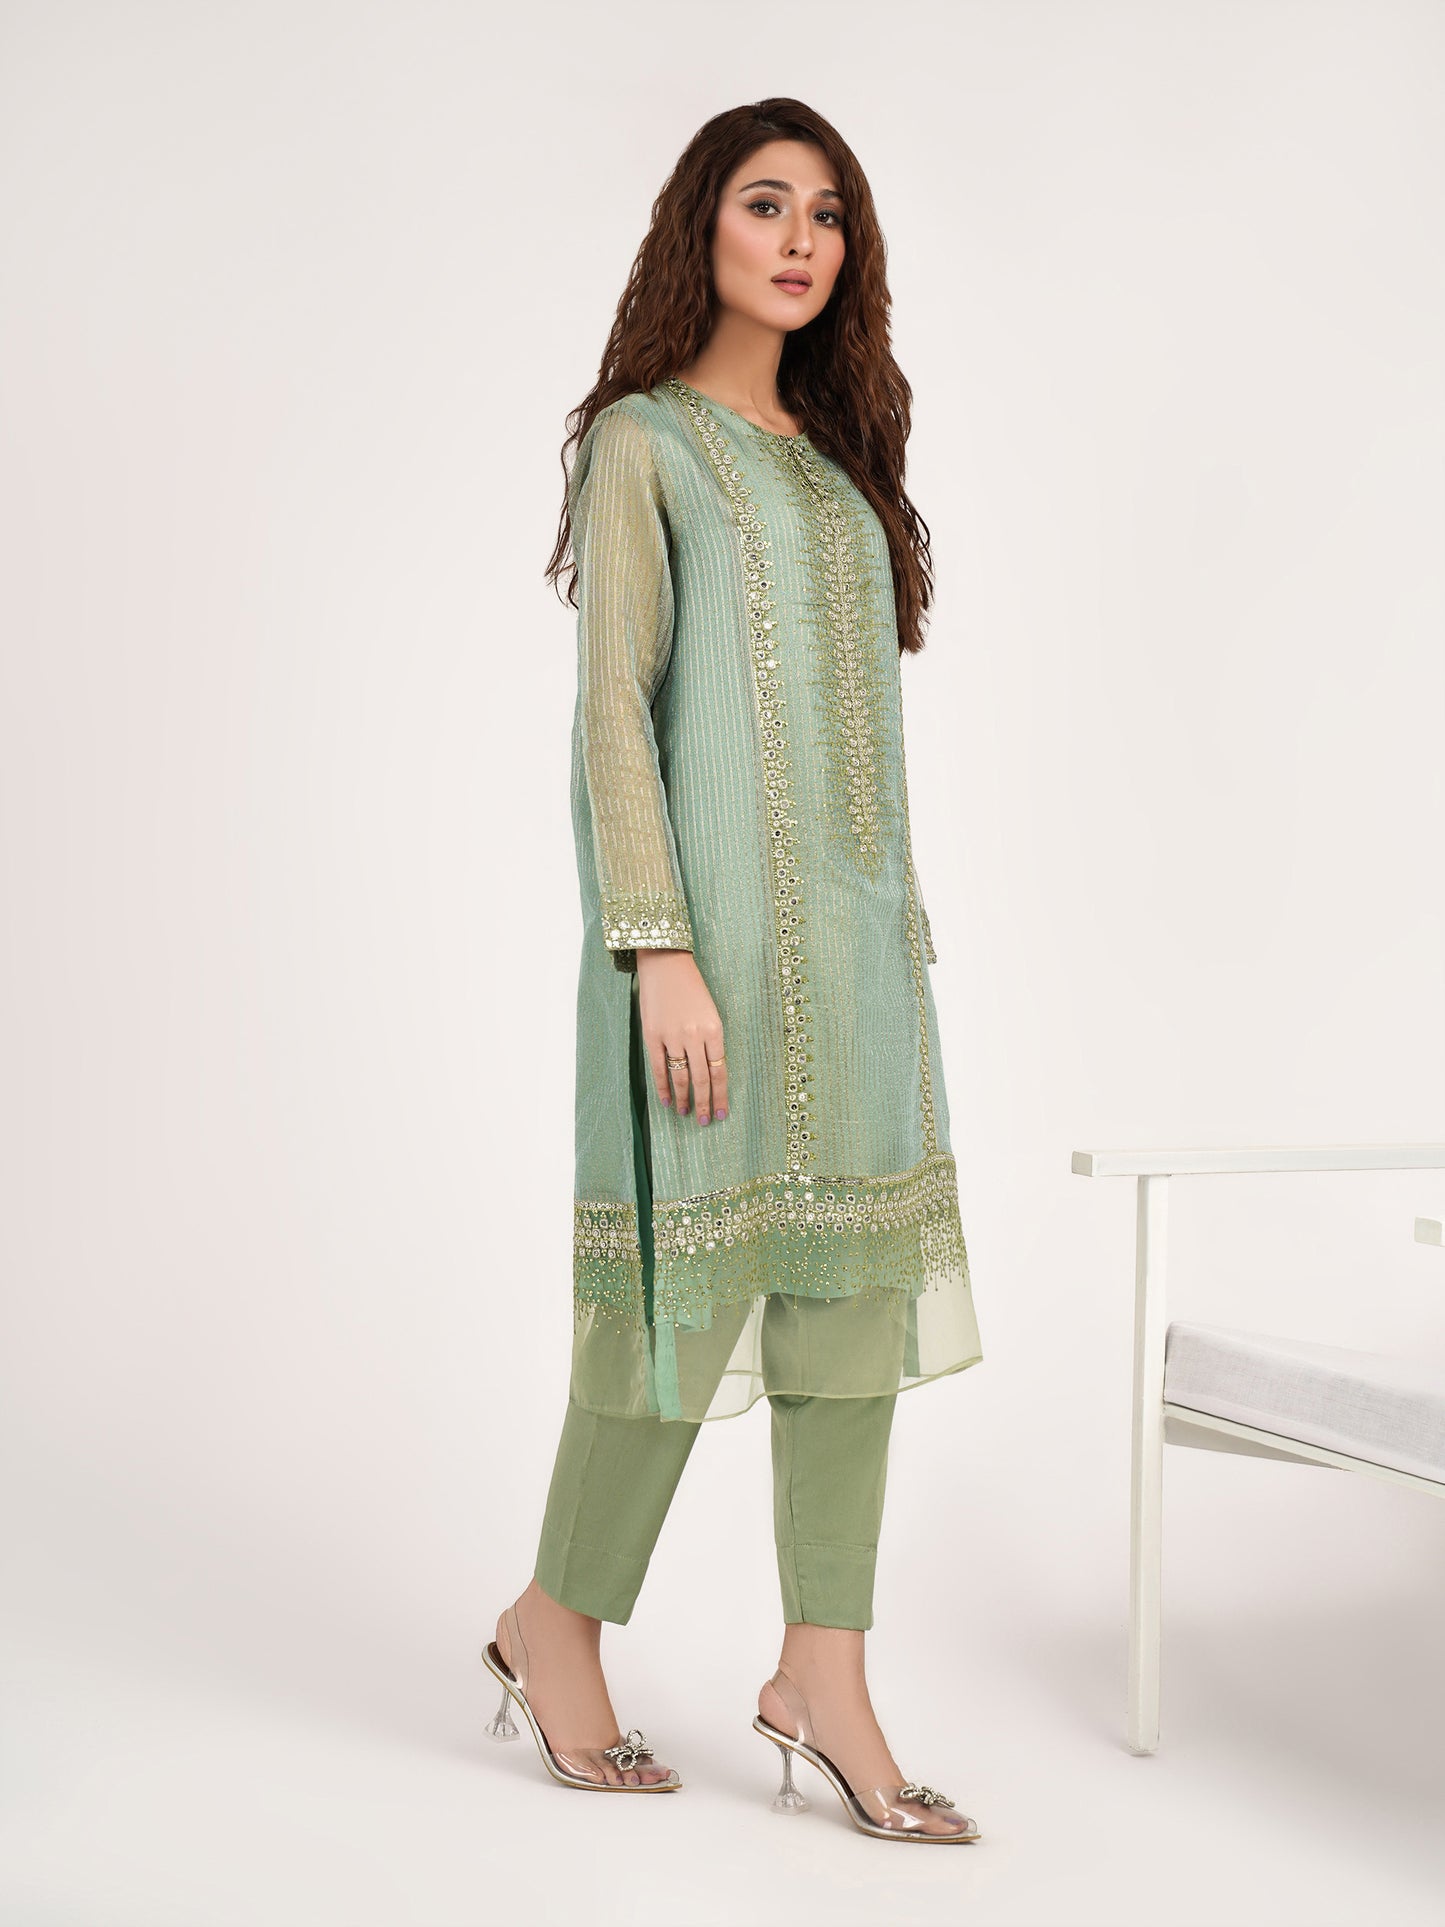 2 Piece Net Suit-Embroidered(Pret)